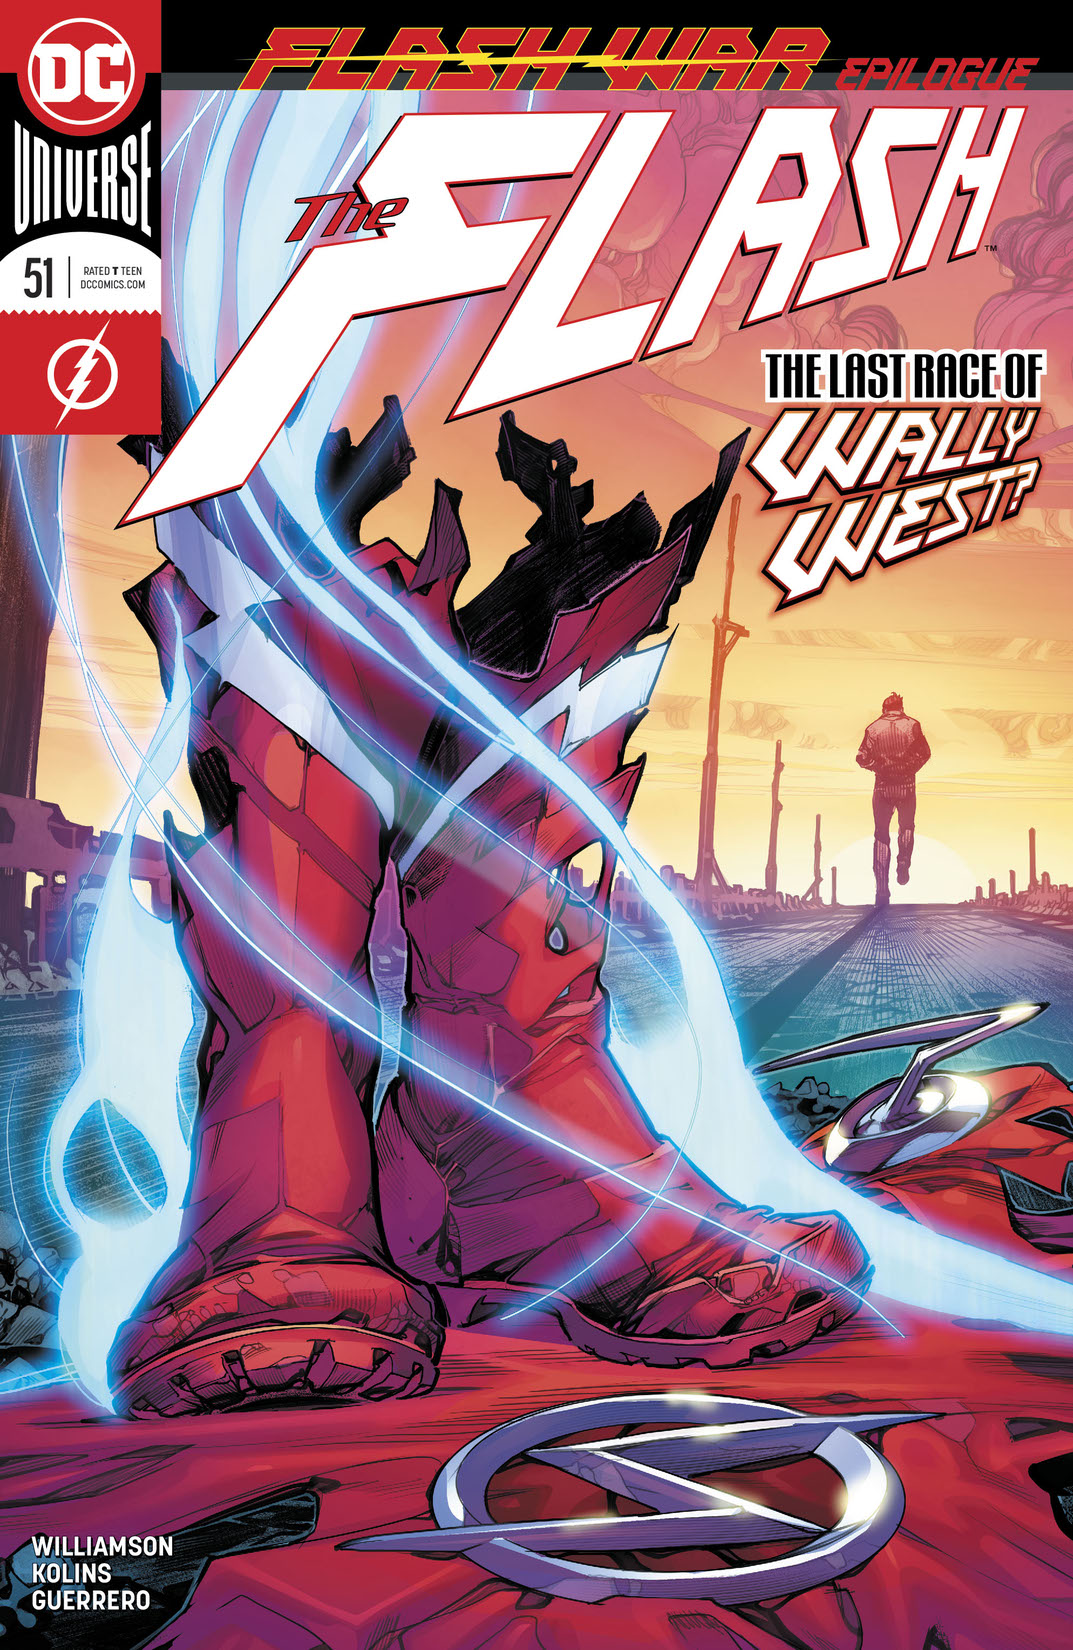 The Flash (2016-) #51 preview images